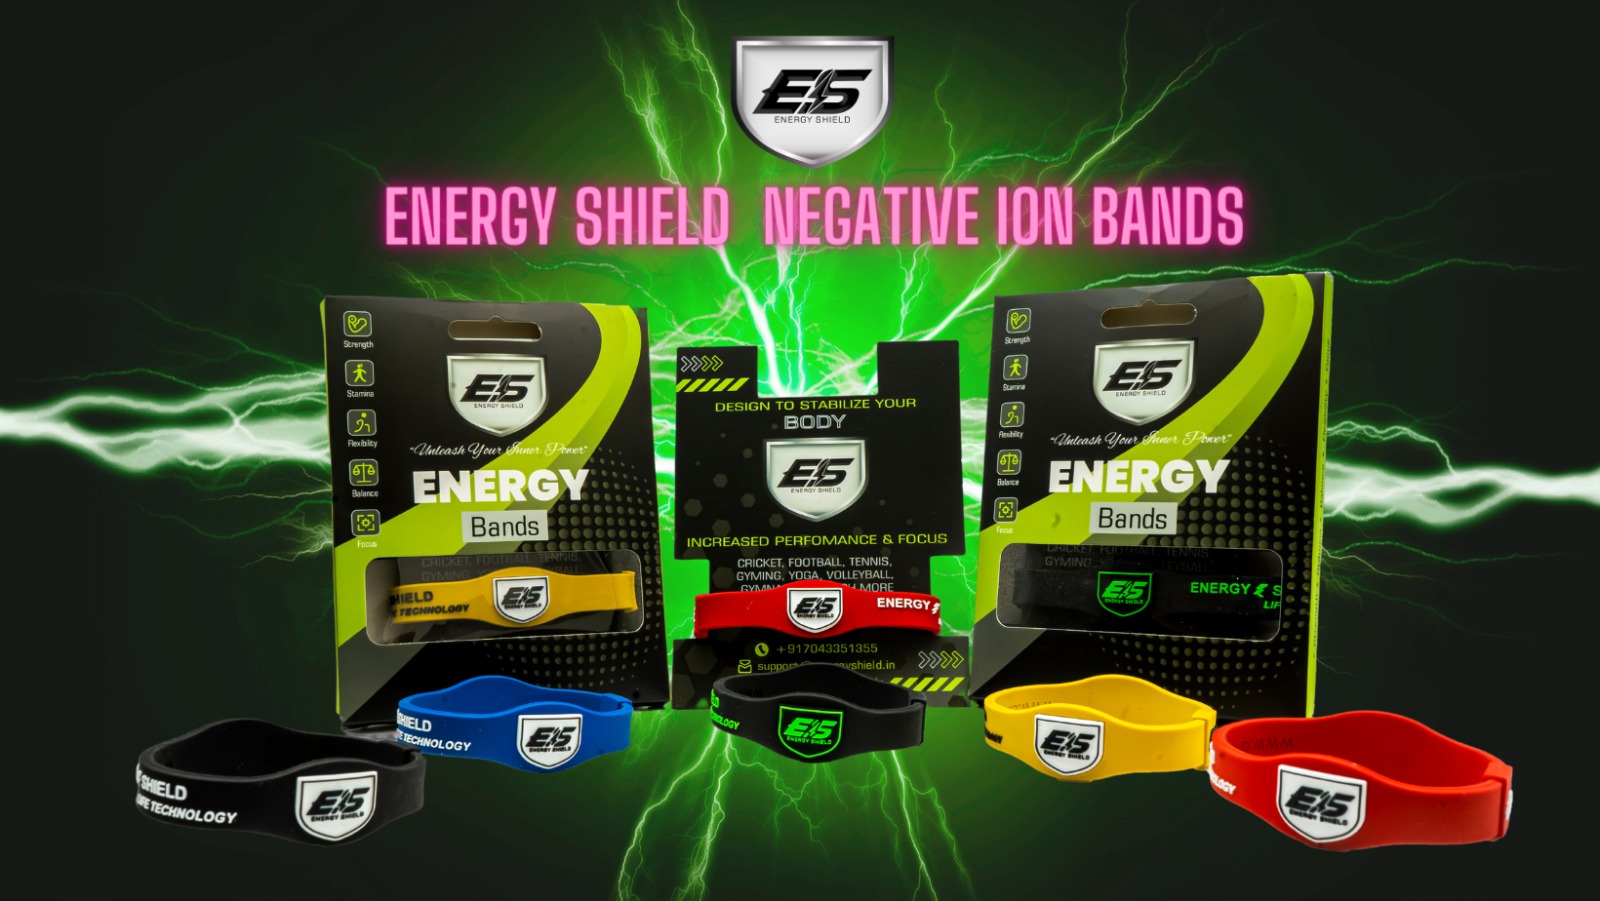 Boost Your Strength, Stamina, Balance, Flexibility and Focus with Negative Ion Bands by Energy Shield: Harnessing Nature’s Power for Positive Health